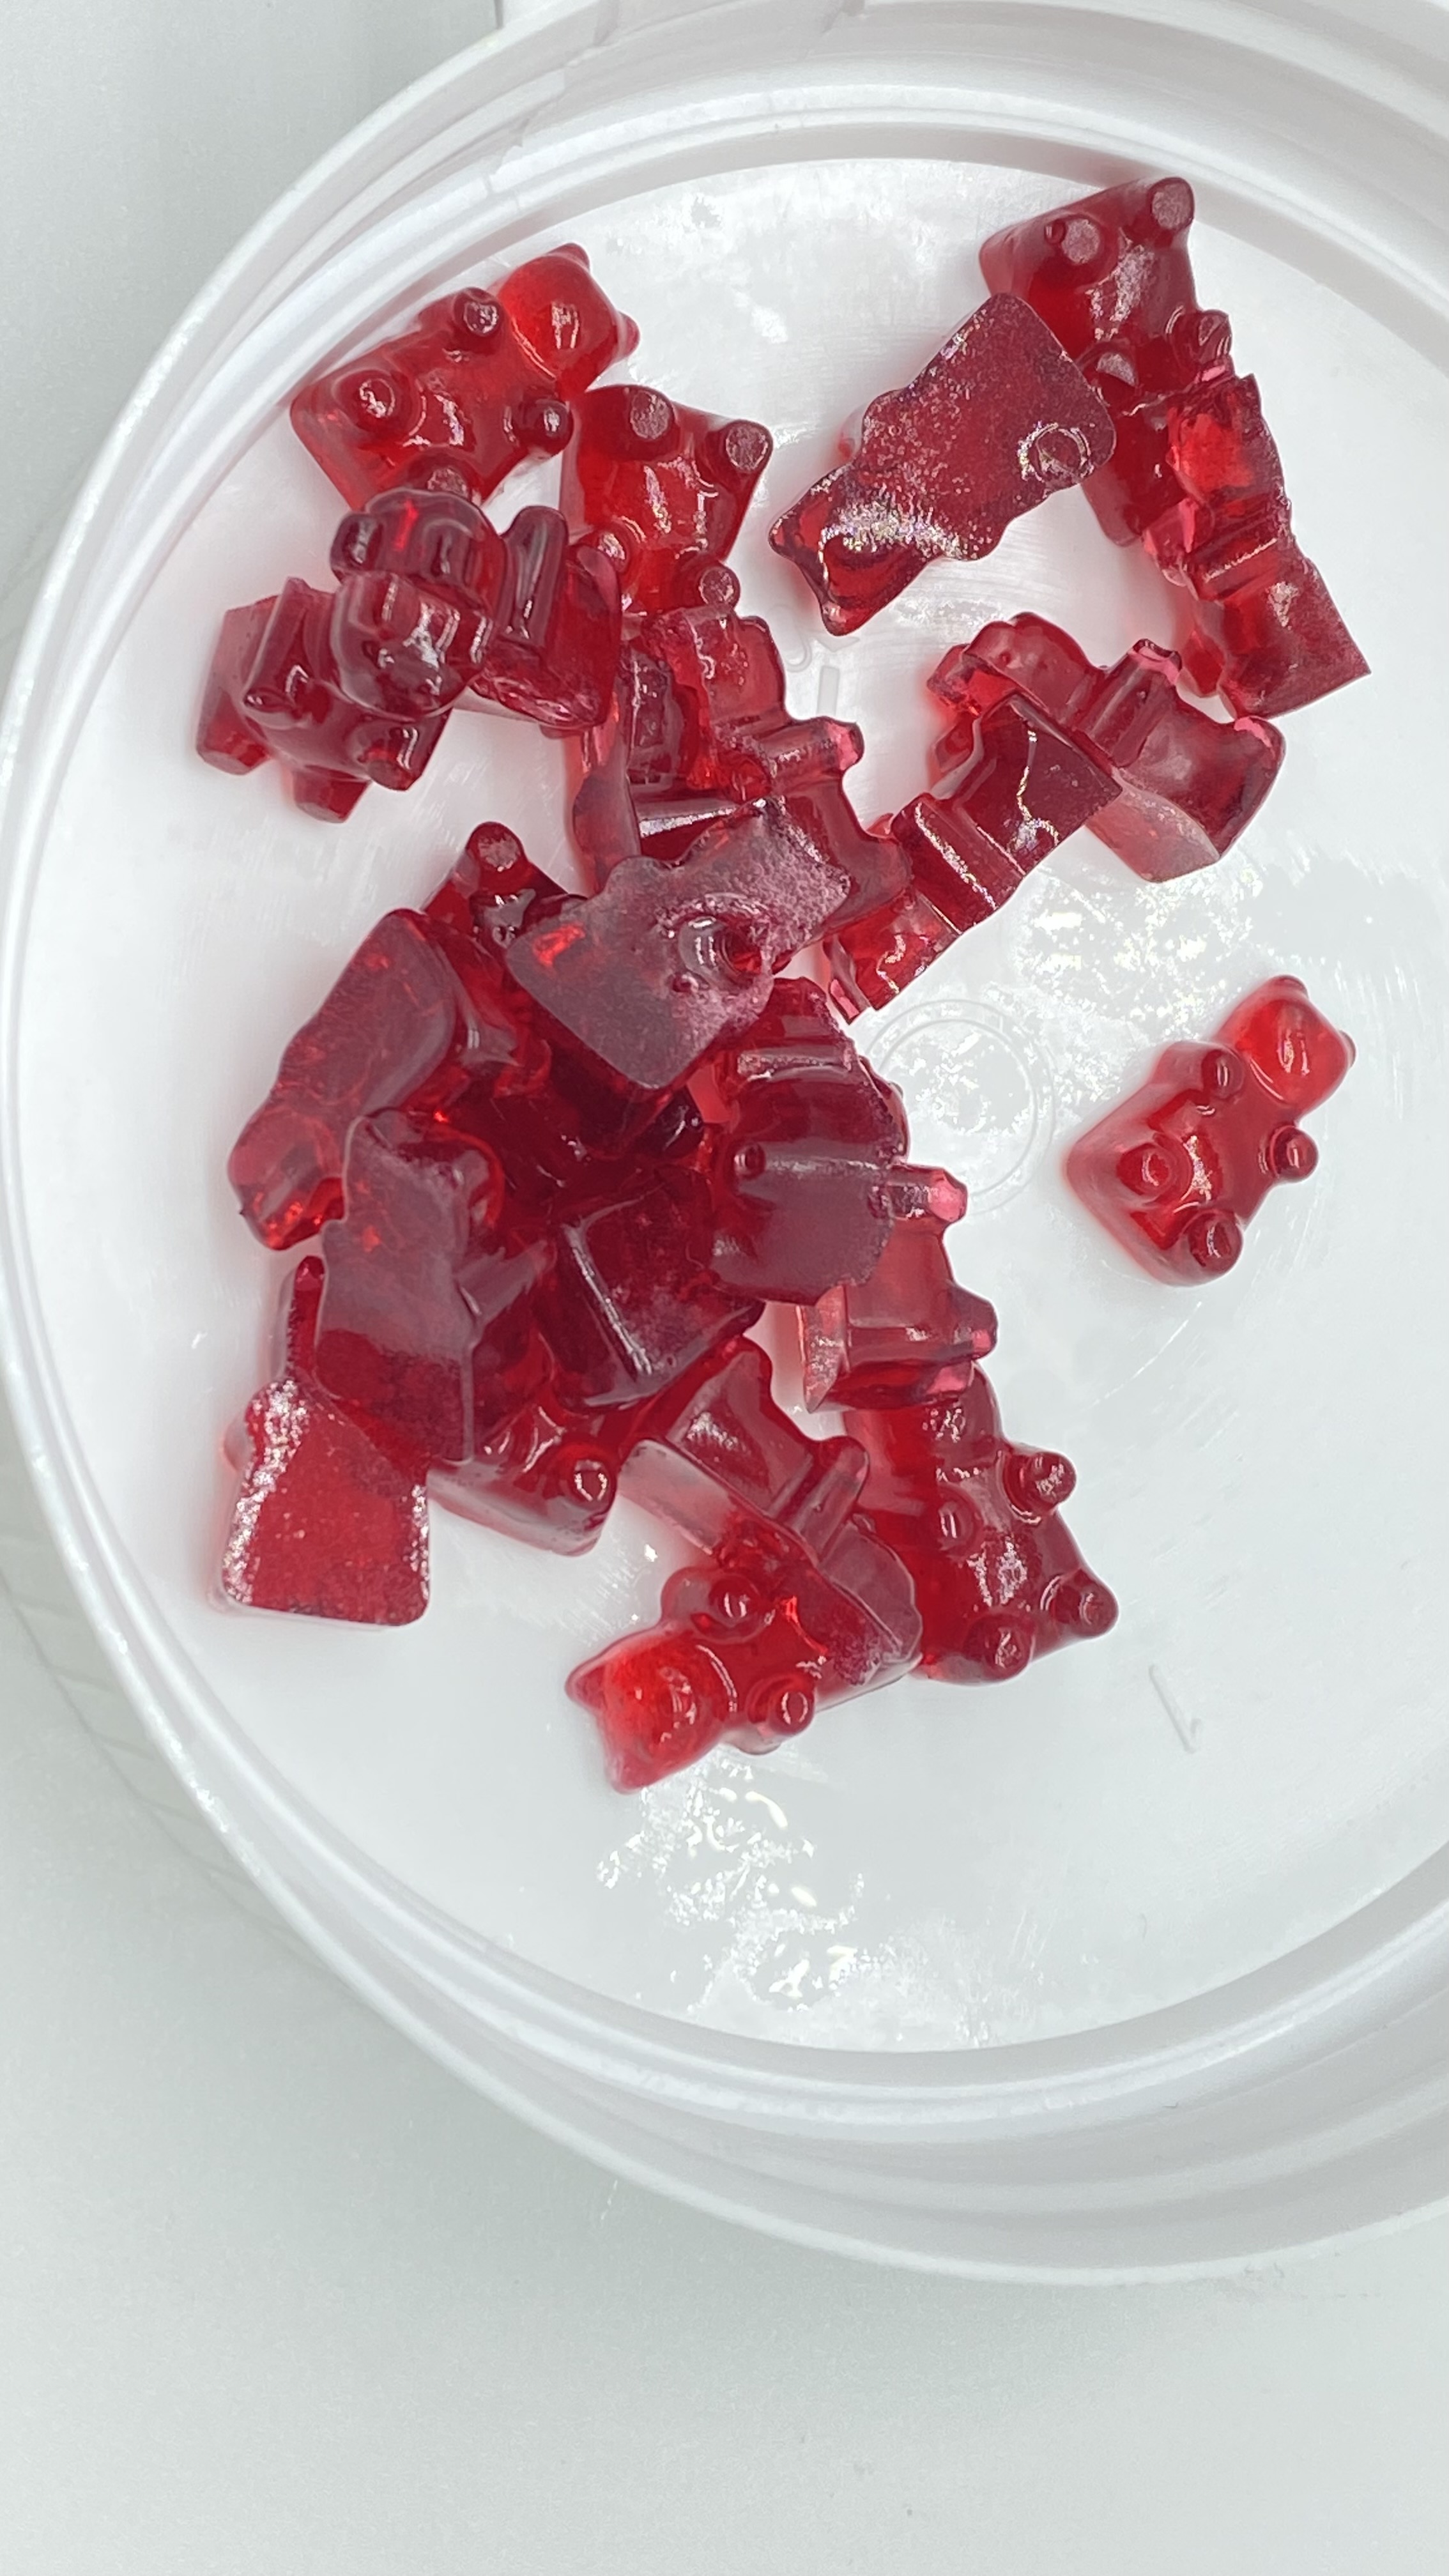 black carrot extract in purple/red colour gummies 